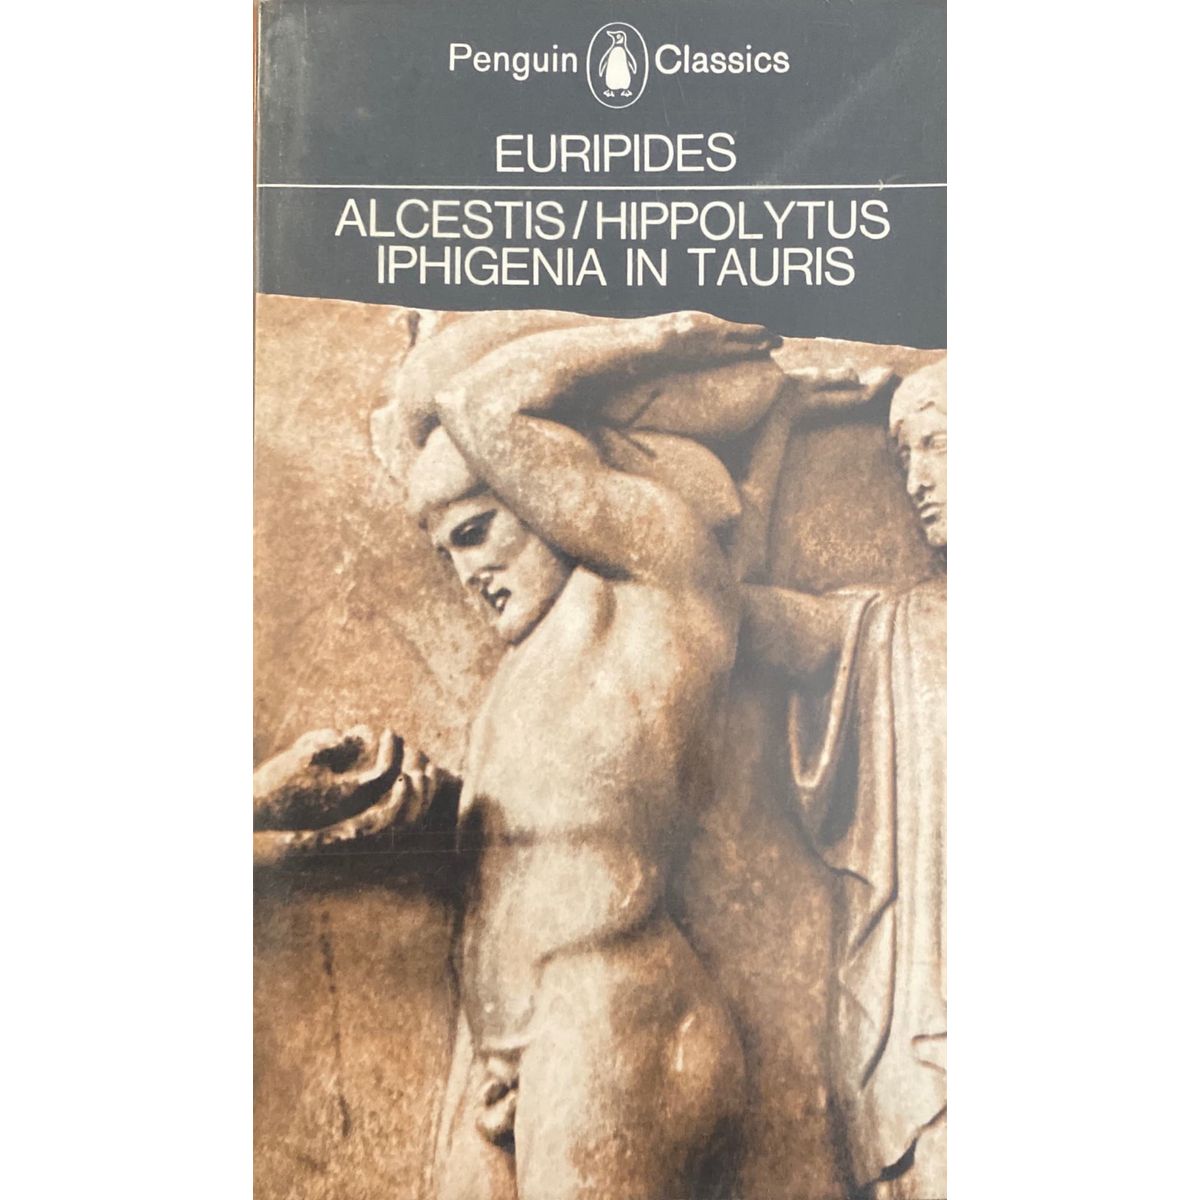 Alcestis and Other Plays by Euripides, translated by Philip Vellacott [1966]